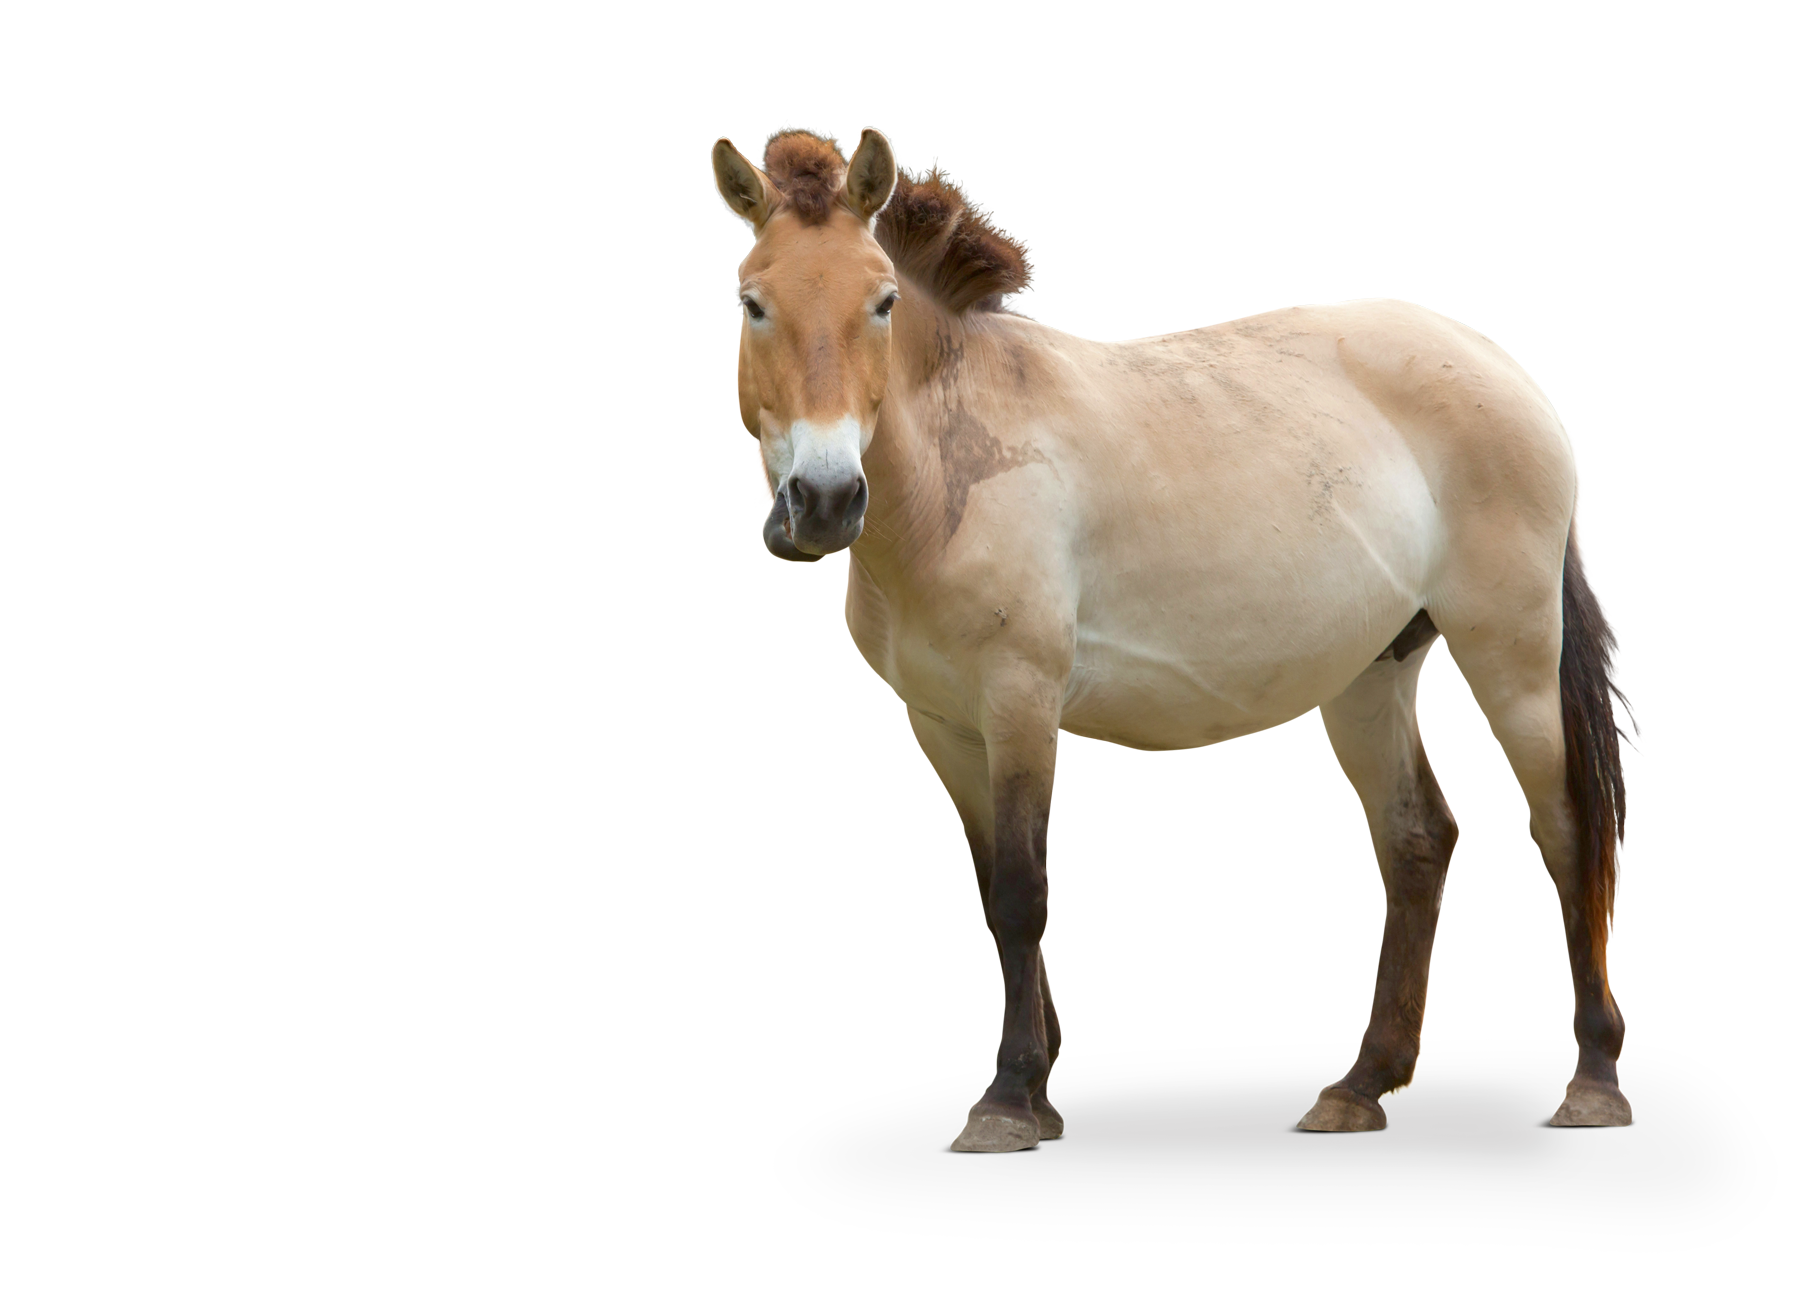 The picture shows a Przewalski's horse. The body is turned to the side and its head is looking towards the camera.